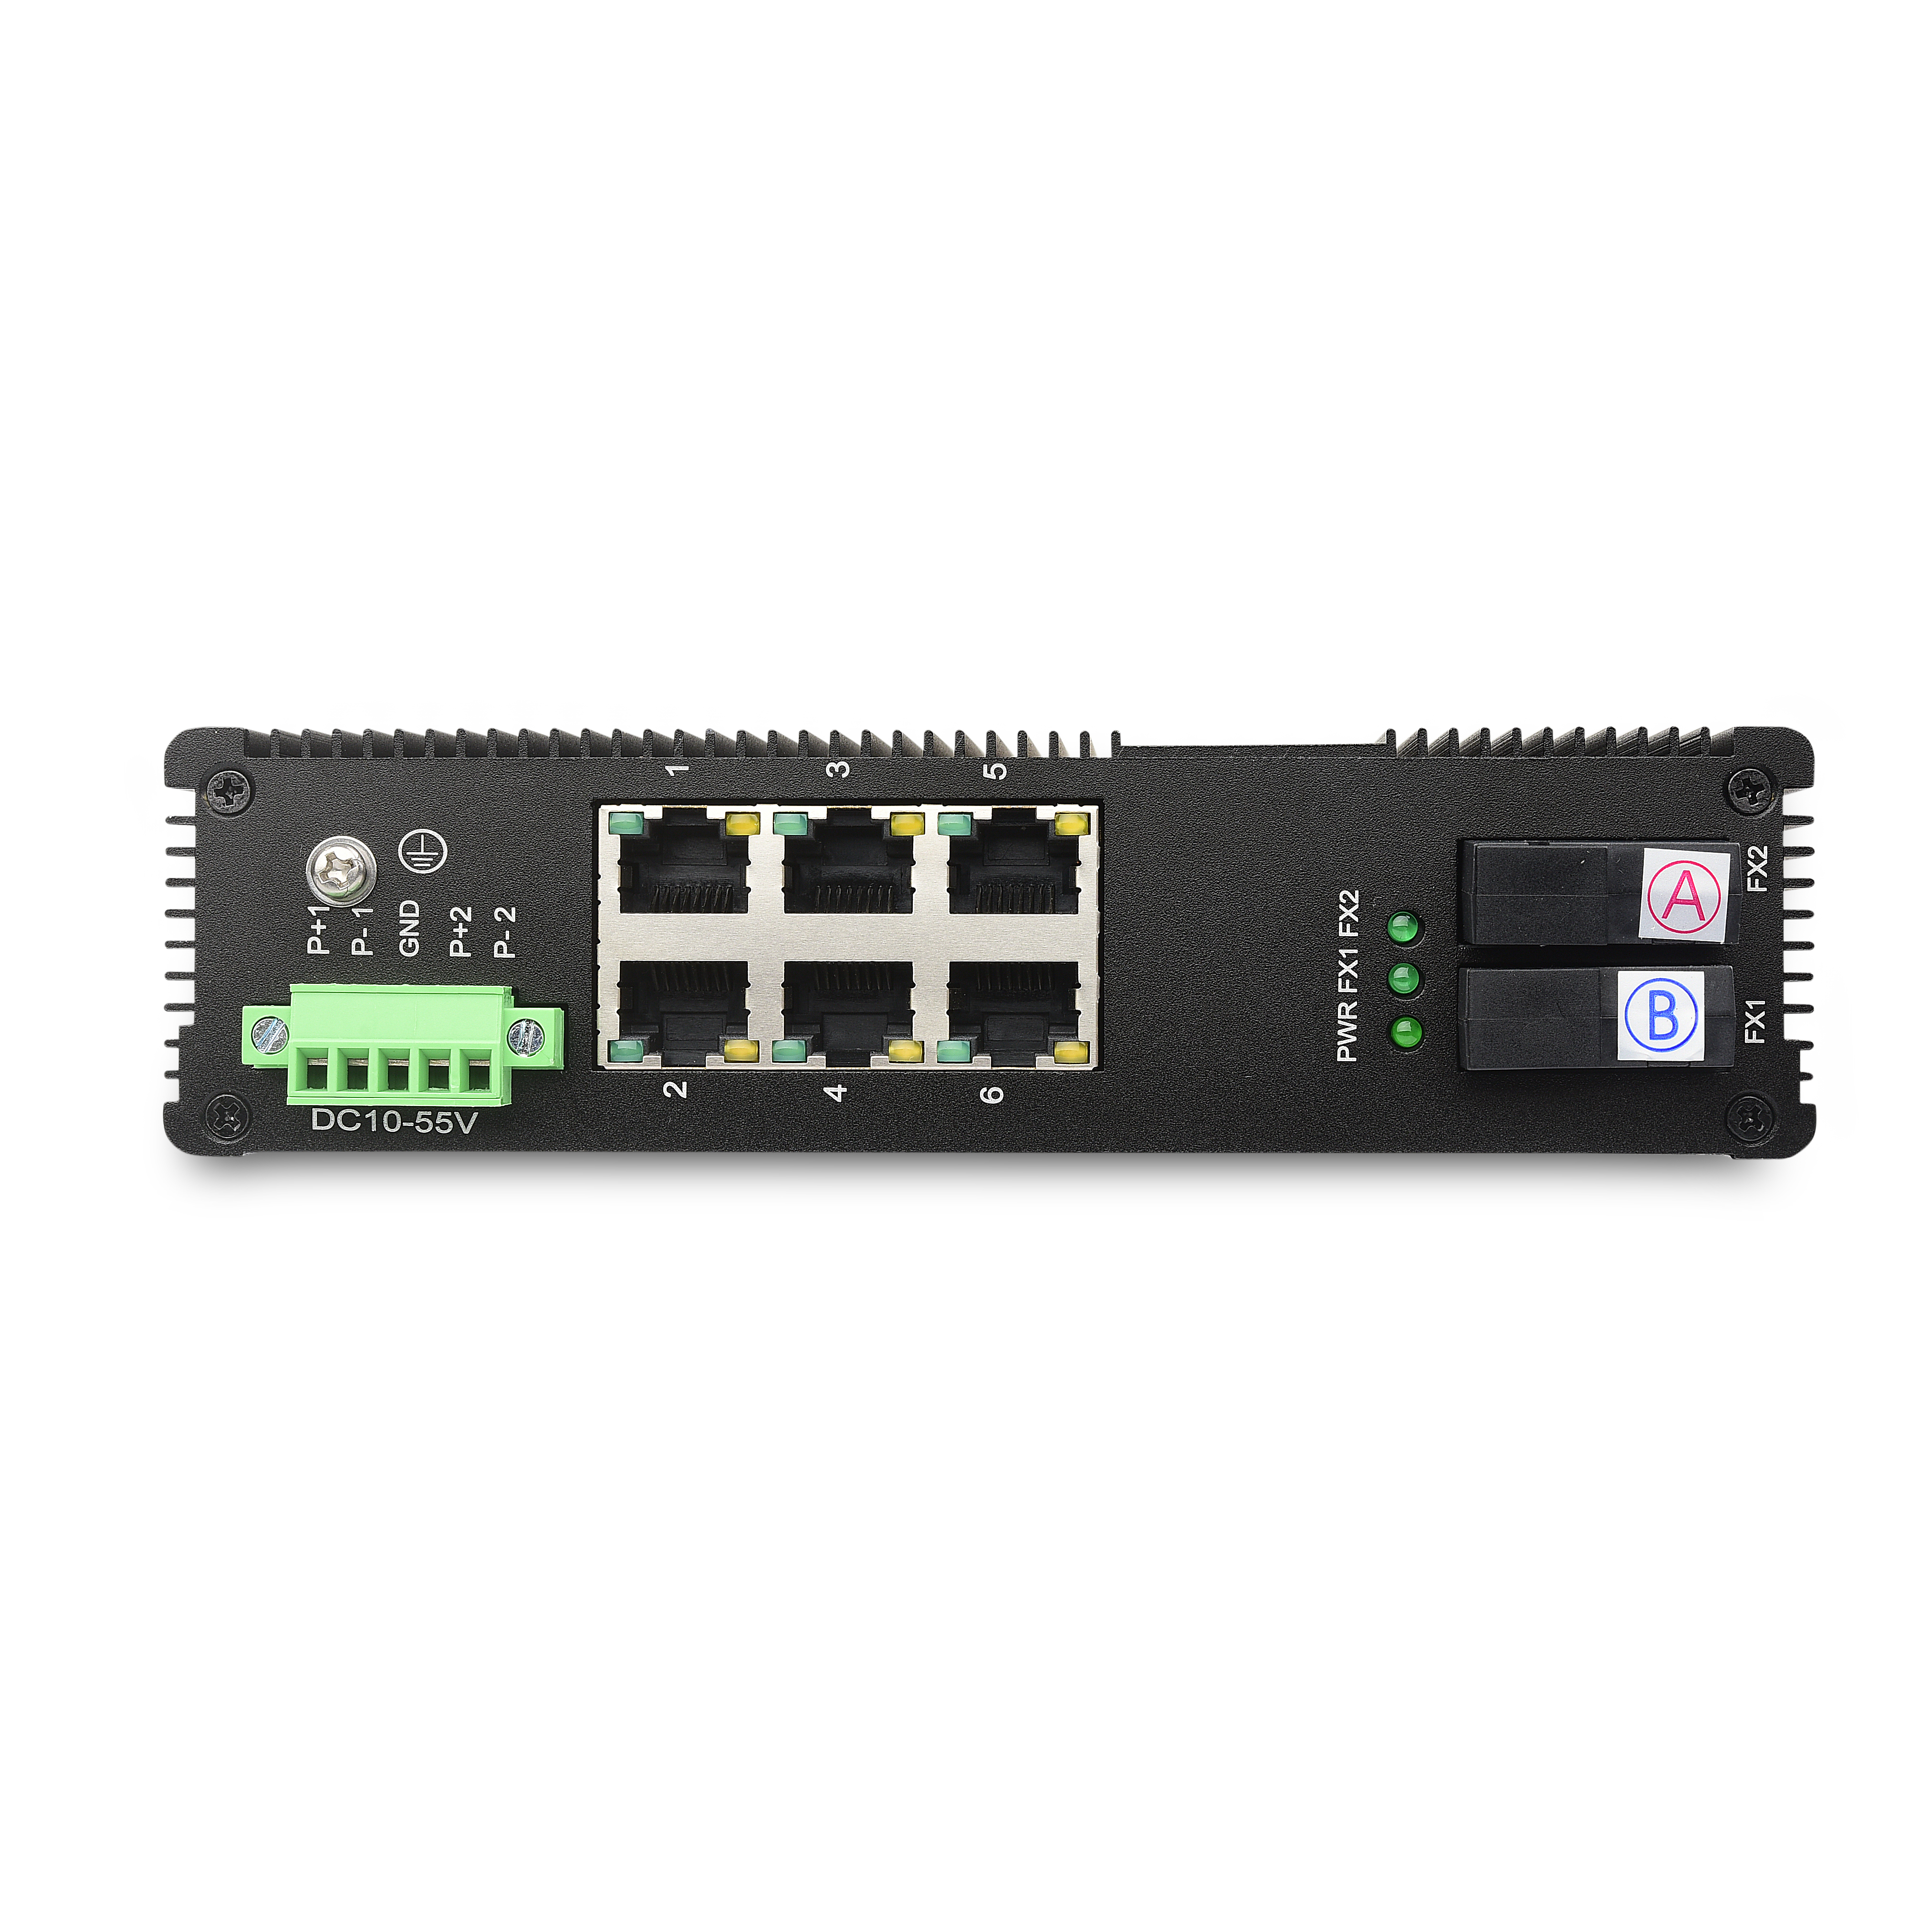 Wholesale China 6 Ports Managed Industrial Switch Suppliers Factories - 6 10/100TX PoE/PoE+ and 2 100FX | Unmanaged Industrial PoE Switch JHA-IF26HP  – JHA